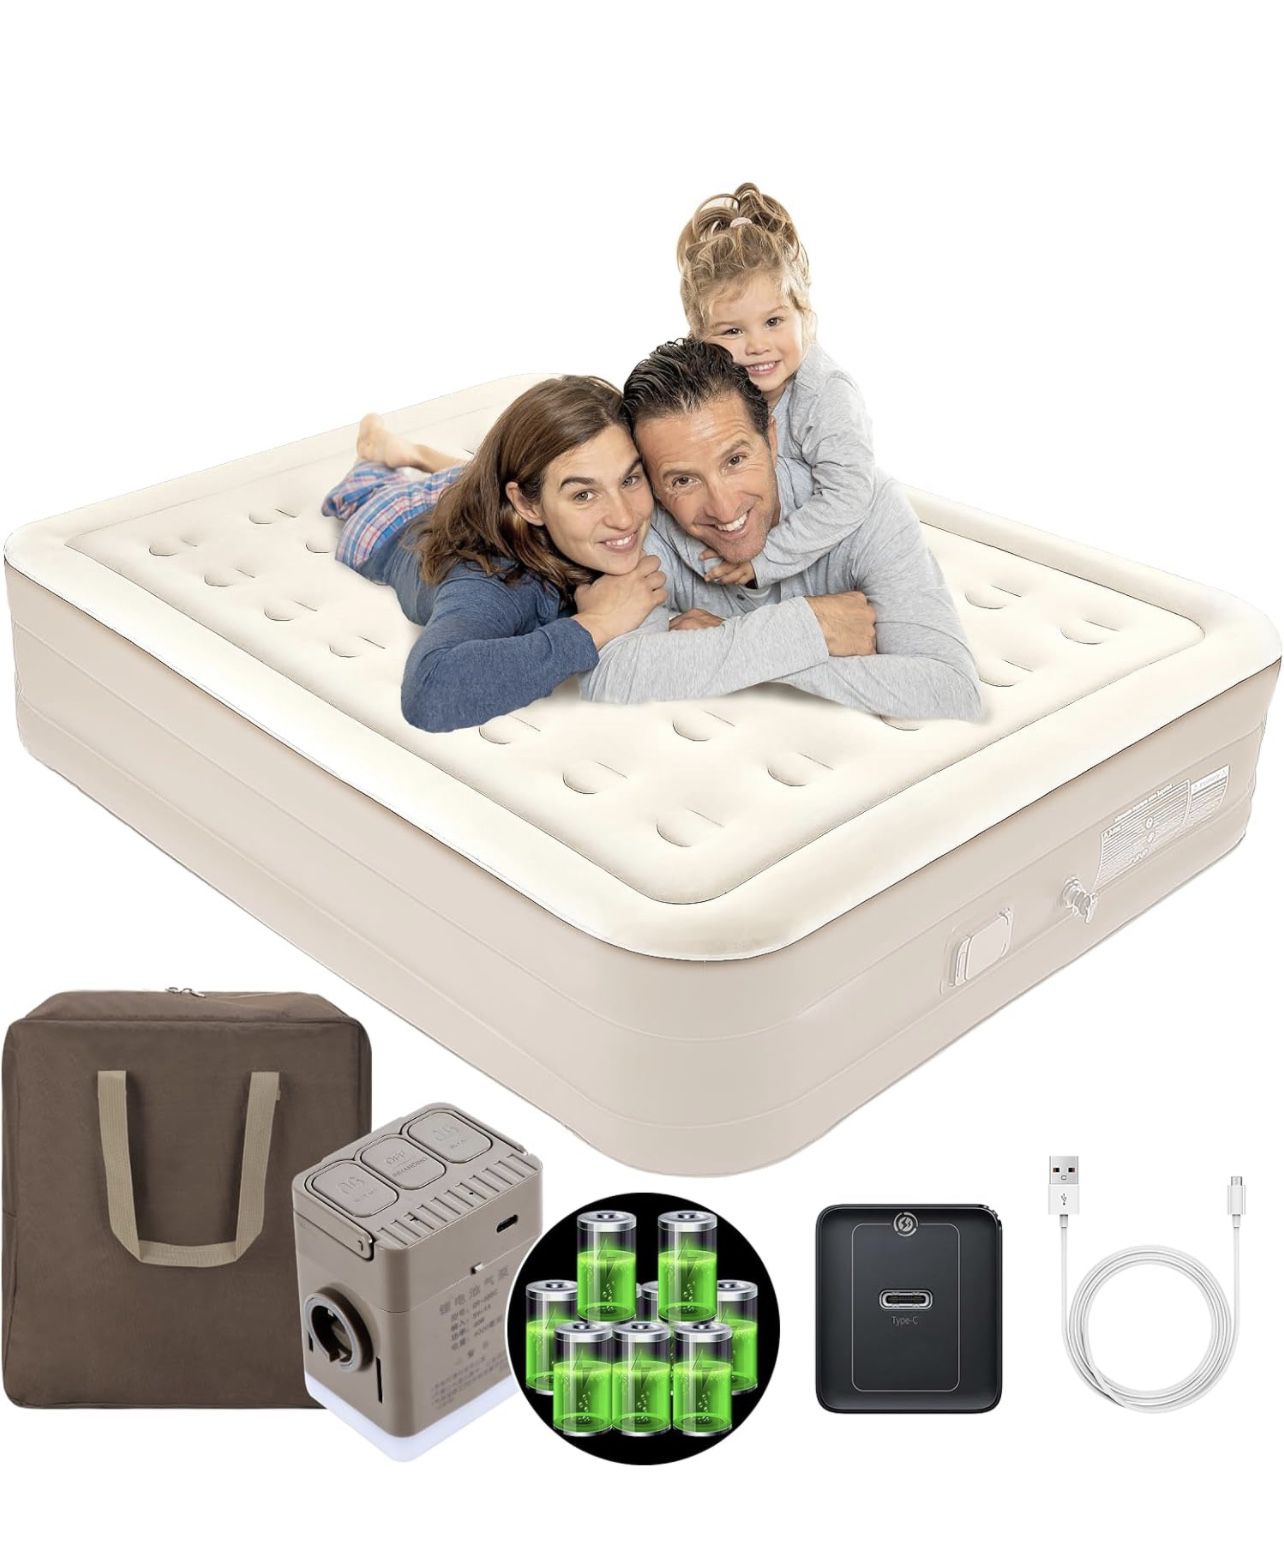  Air Mattress, Luxury Inflatable Bed